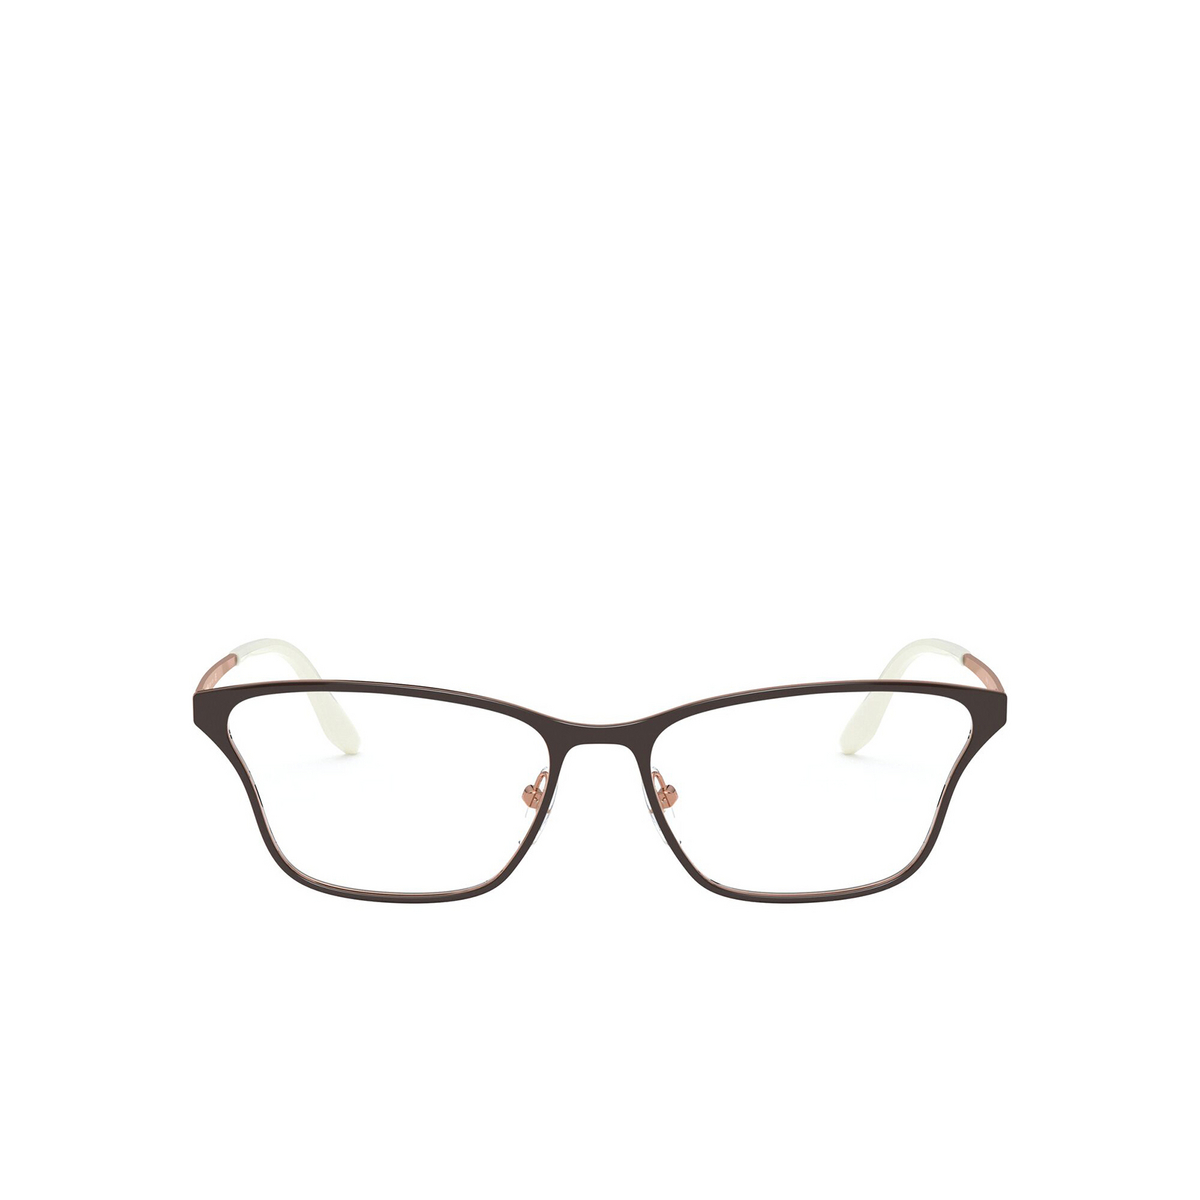 Prada® Butterfly Eyeglasses: PR 60XV color Top Brown / Rose Gold 3311O1 - front view.